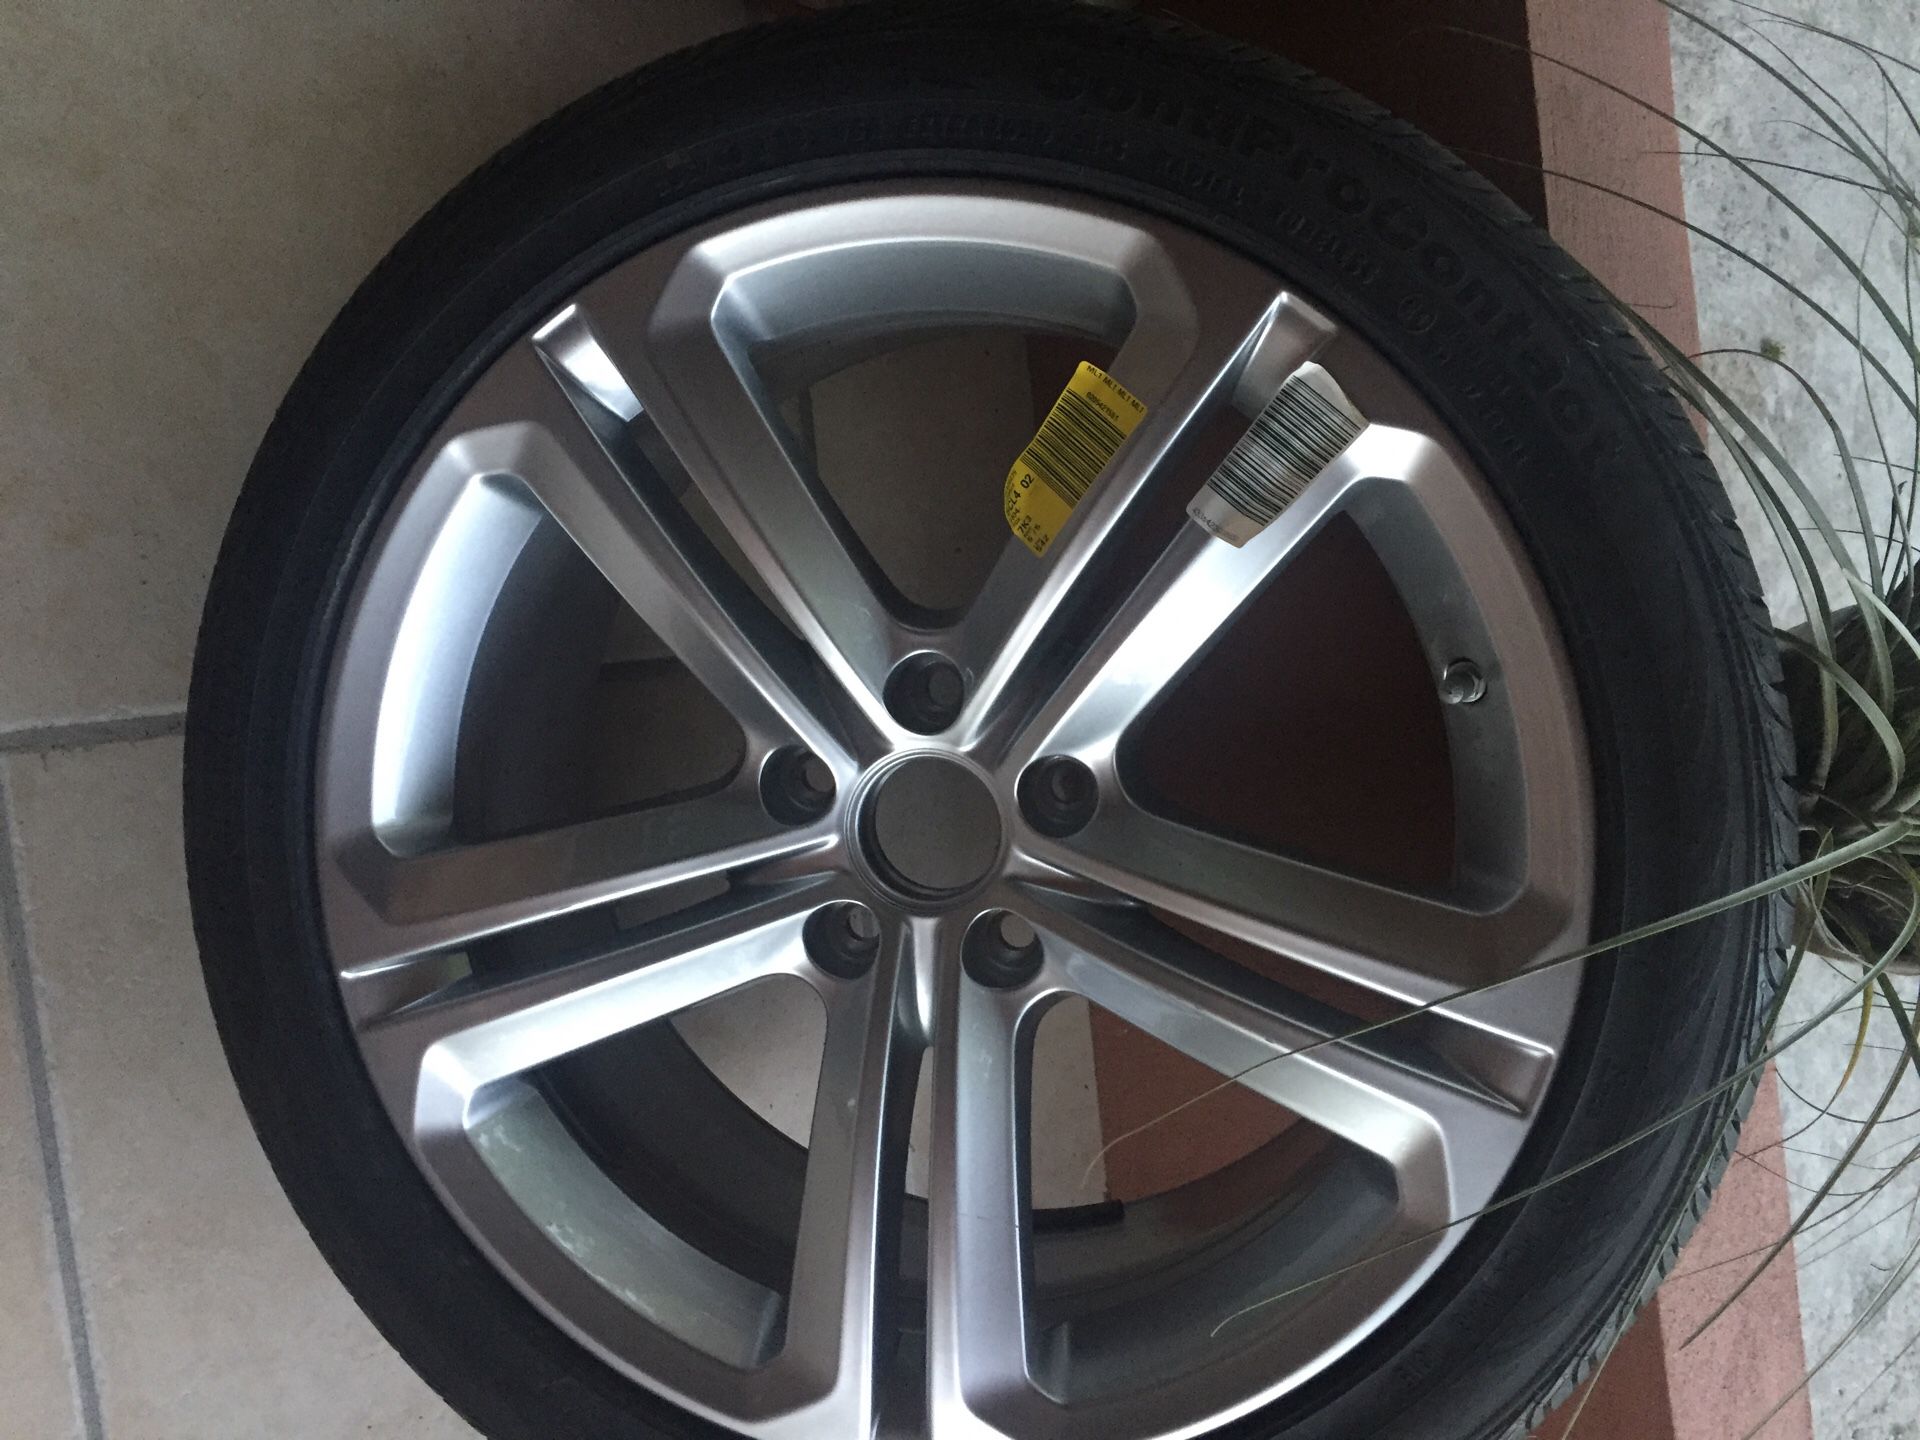 VW Yetta 2015/18 wheel & Tire great condition never on like New. It is ONLY one New wheel with New tire